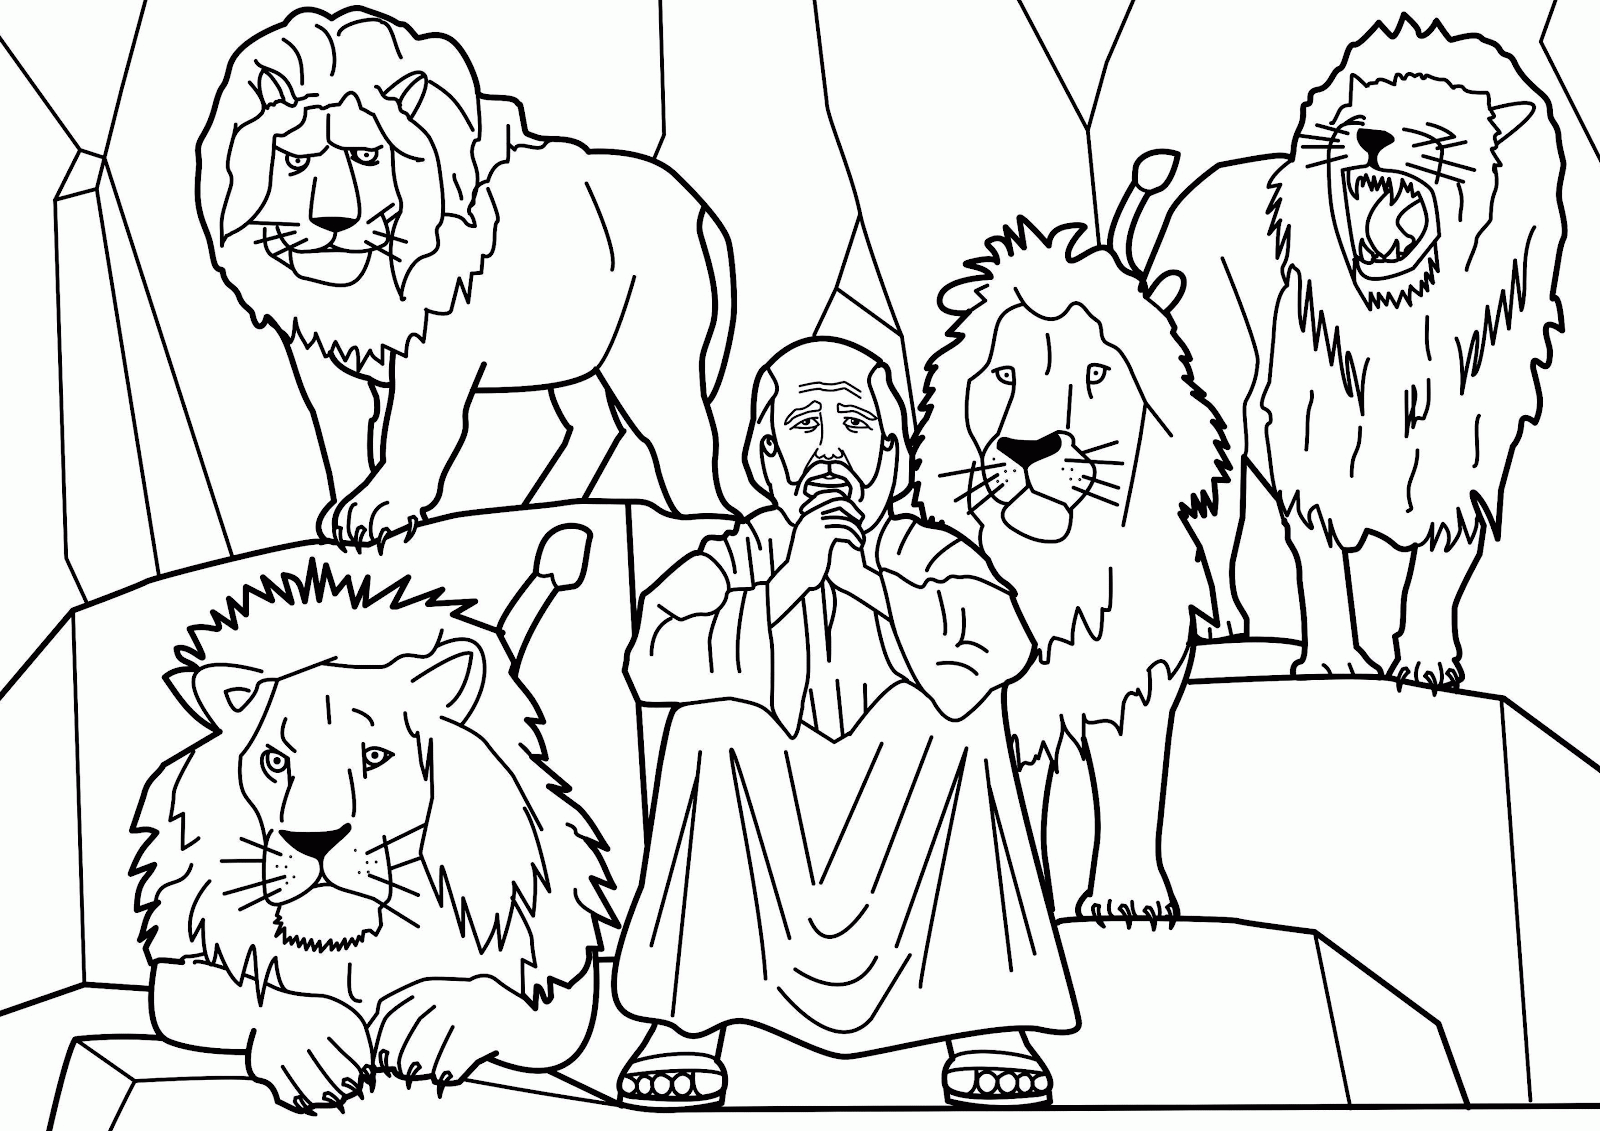 Daniel In The Lion Den Coloring Pages Coloring Home